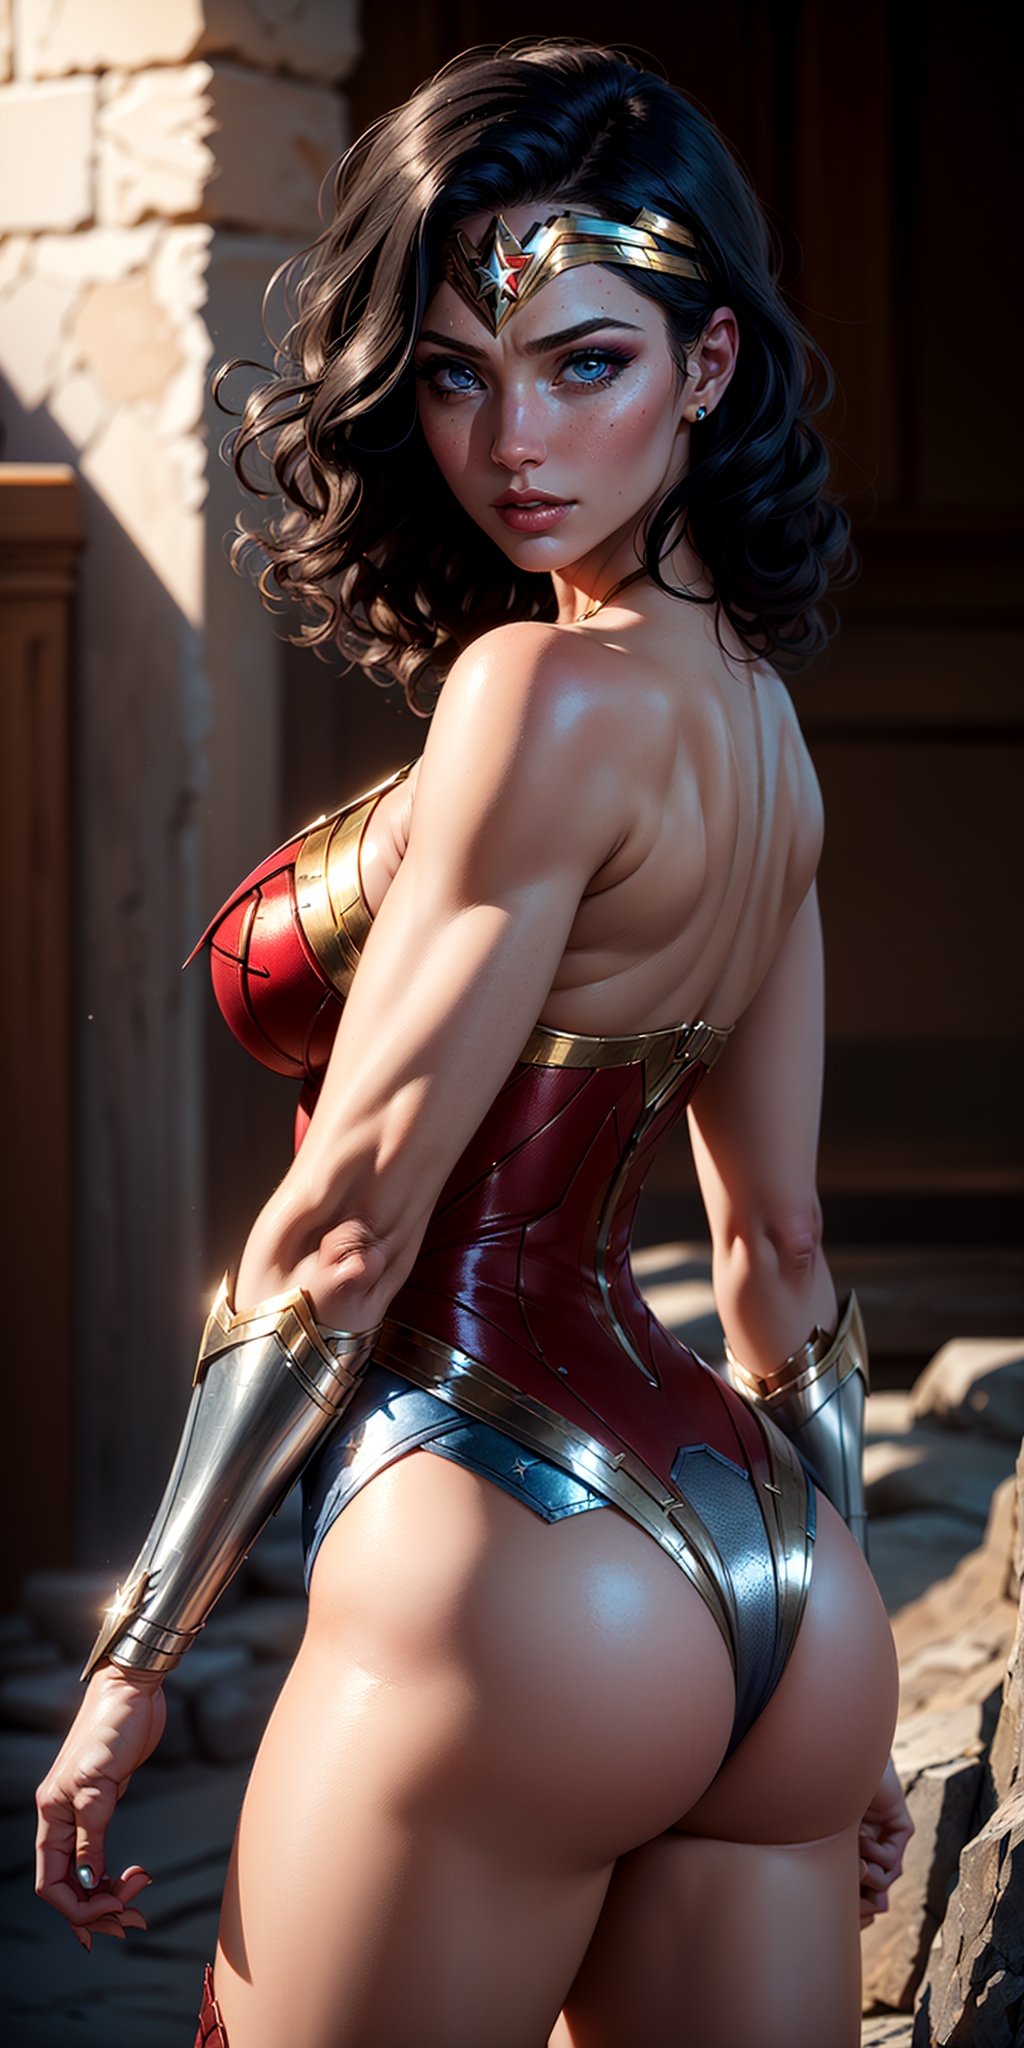 1woman, Wonder Woman, (((standing on mountain)), (intricate details, makeup), (delicate and beautiful delicate face, delicate and beautiful delicate eyes, perfectly proportioned face), delicate skin, strong and realistic blue eyes, realistic black hair, lips, makeup, natural skin texture, tiara, jewelry, (star), \(symbol\),(((leotard))), (((wonder woman uniform))), gauntlet, red boots, golden girdle, (public clothing: 1.5), bare shoulders, slightly sunburned complexion, mature, sexy, toned muscles, (muscles:1.2), ((view from behind)), standing on a mountain, ((strong and healthy body)), ((((more) muscles))), long legs, curves, (big breasts: 1.3), thin waist, soft waist, (delicate skin), (beautiful and sexy woman), (swollen lips: 0.9), very delicate muscles, standing,(realistic: 1.5), photorealistic, octane rendering, hyperrealistic, tight modeling, (photorealistic face: 1.2), thick eyelashes, long eyelashes, (curly dark hair: 1.1), best quality, half smile, (looking at the viewer), sharp focus, (4k), (masterpiece), (best quality), fantasy, extremely detailed, intricate, hyper detailed, (perfect face), illustration, soft lighting,(specular lighting:1.4), blue eyes, absurdly photorealistic, ultra high resolution, intricate, hyperdetailed, (skindentation), female, detailed body, (detailed face: 1.1), (outlined iris), (hydrocolor lenses), (perfect eyes), 4k, gorgeous, (masterpiece: 1.2), (best quality:1.2),